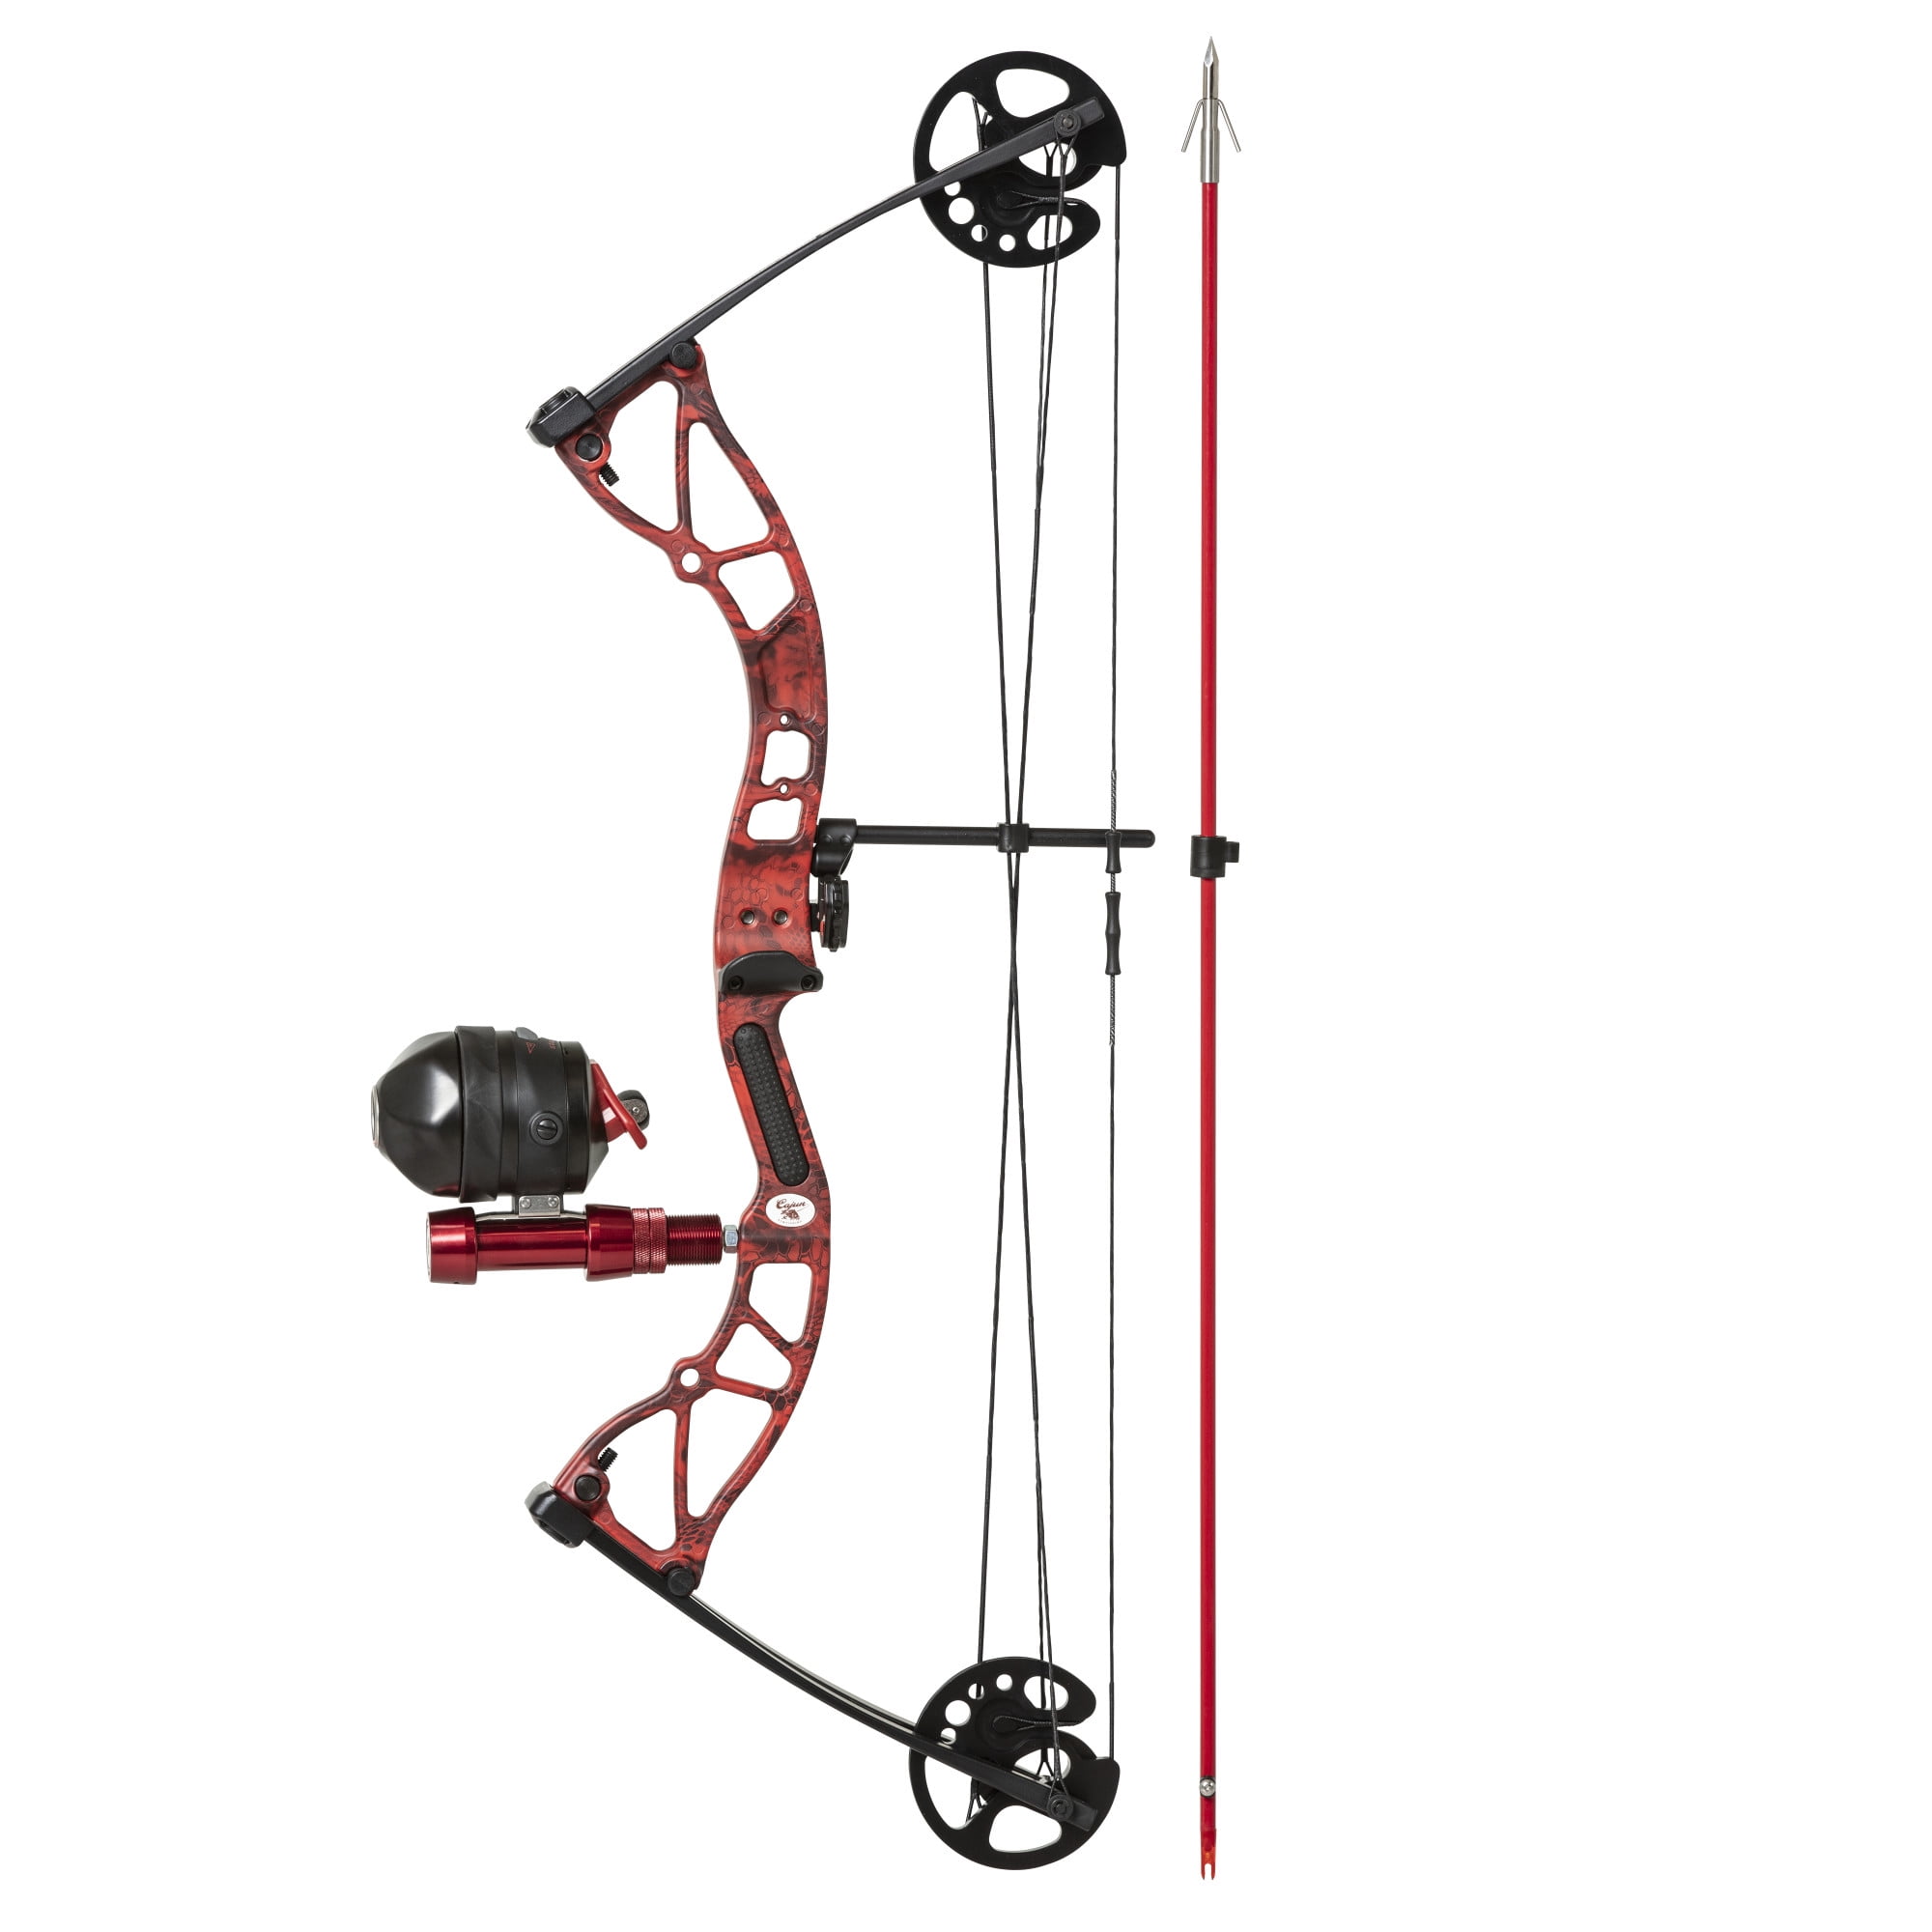 New Compound Bow Fishing Spinning Reel&Base For Fishing Archery Hunting Shooting 